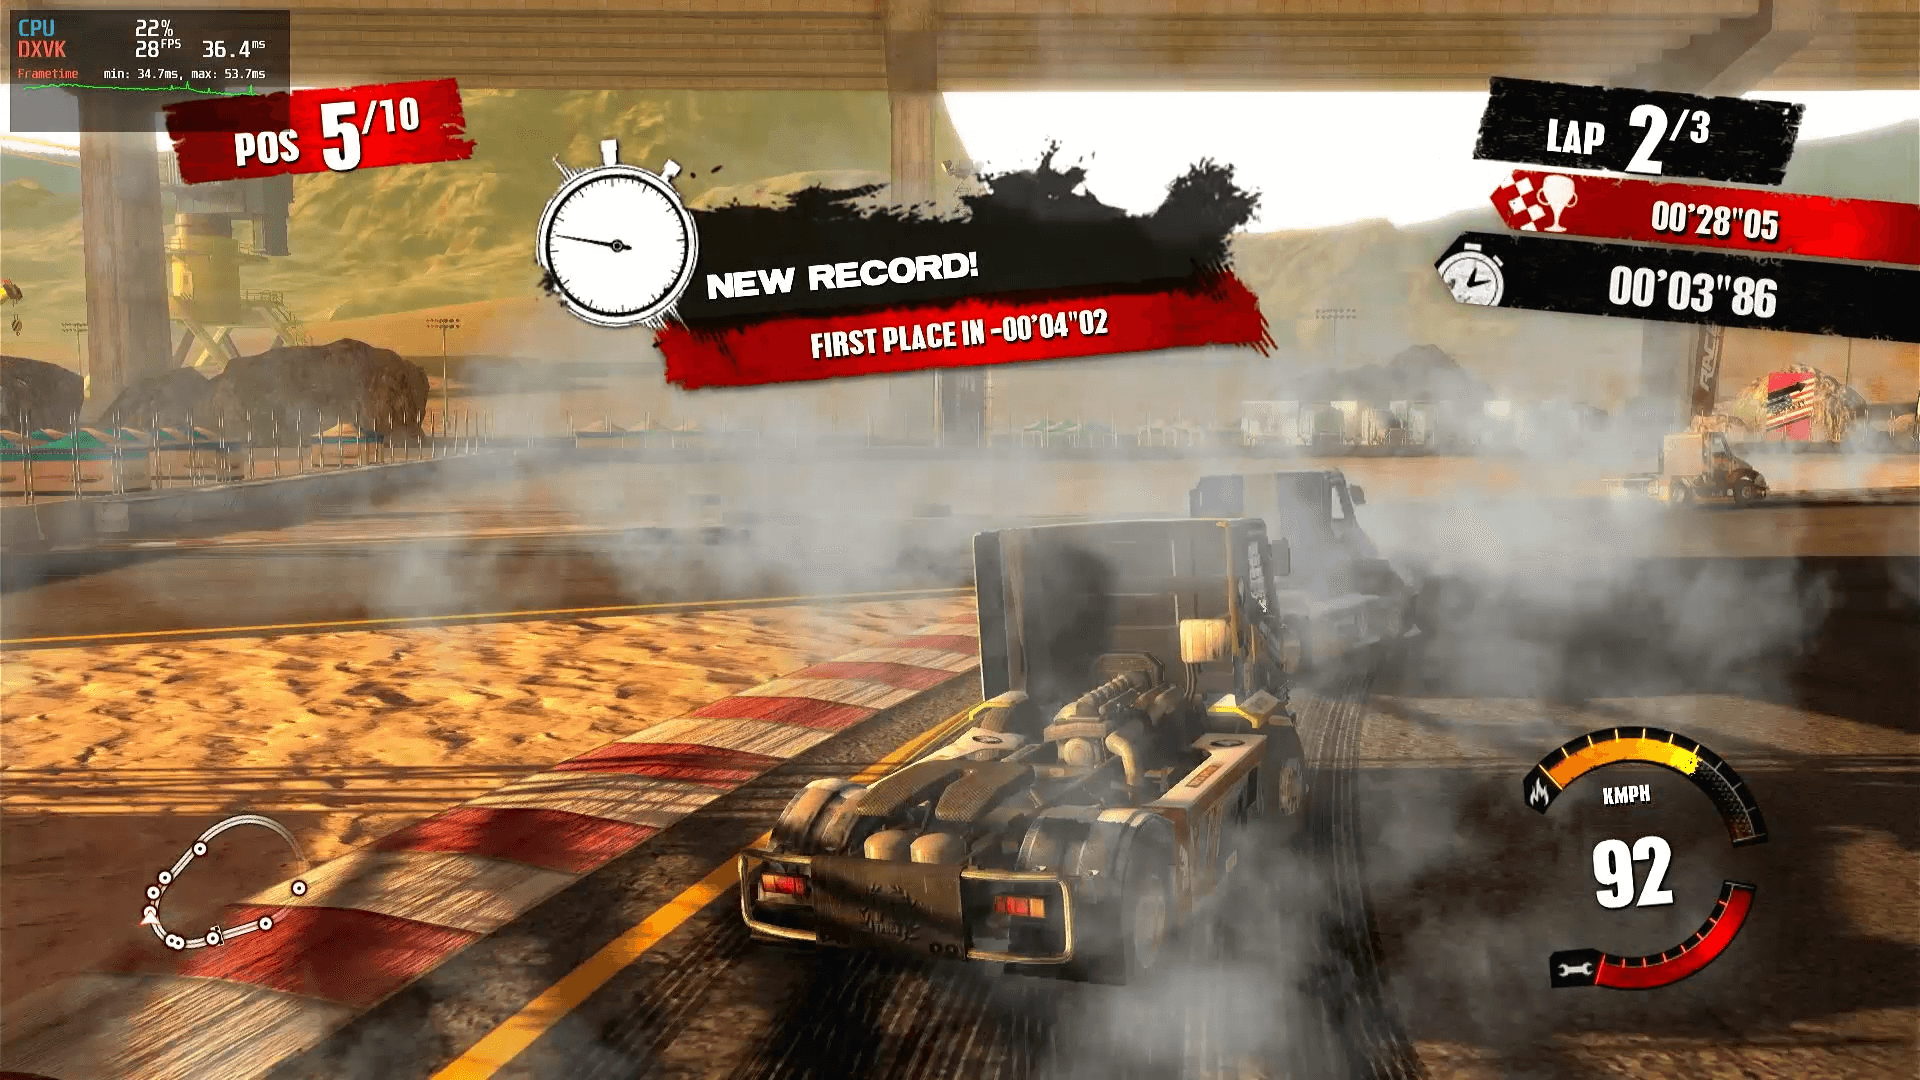 Truck Racer, 1080p fullscreen gameplay on WinesapOS for PS4, based on SteamOS 3